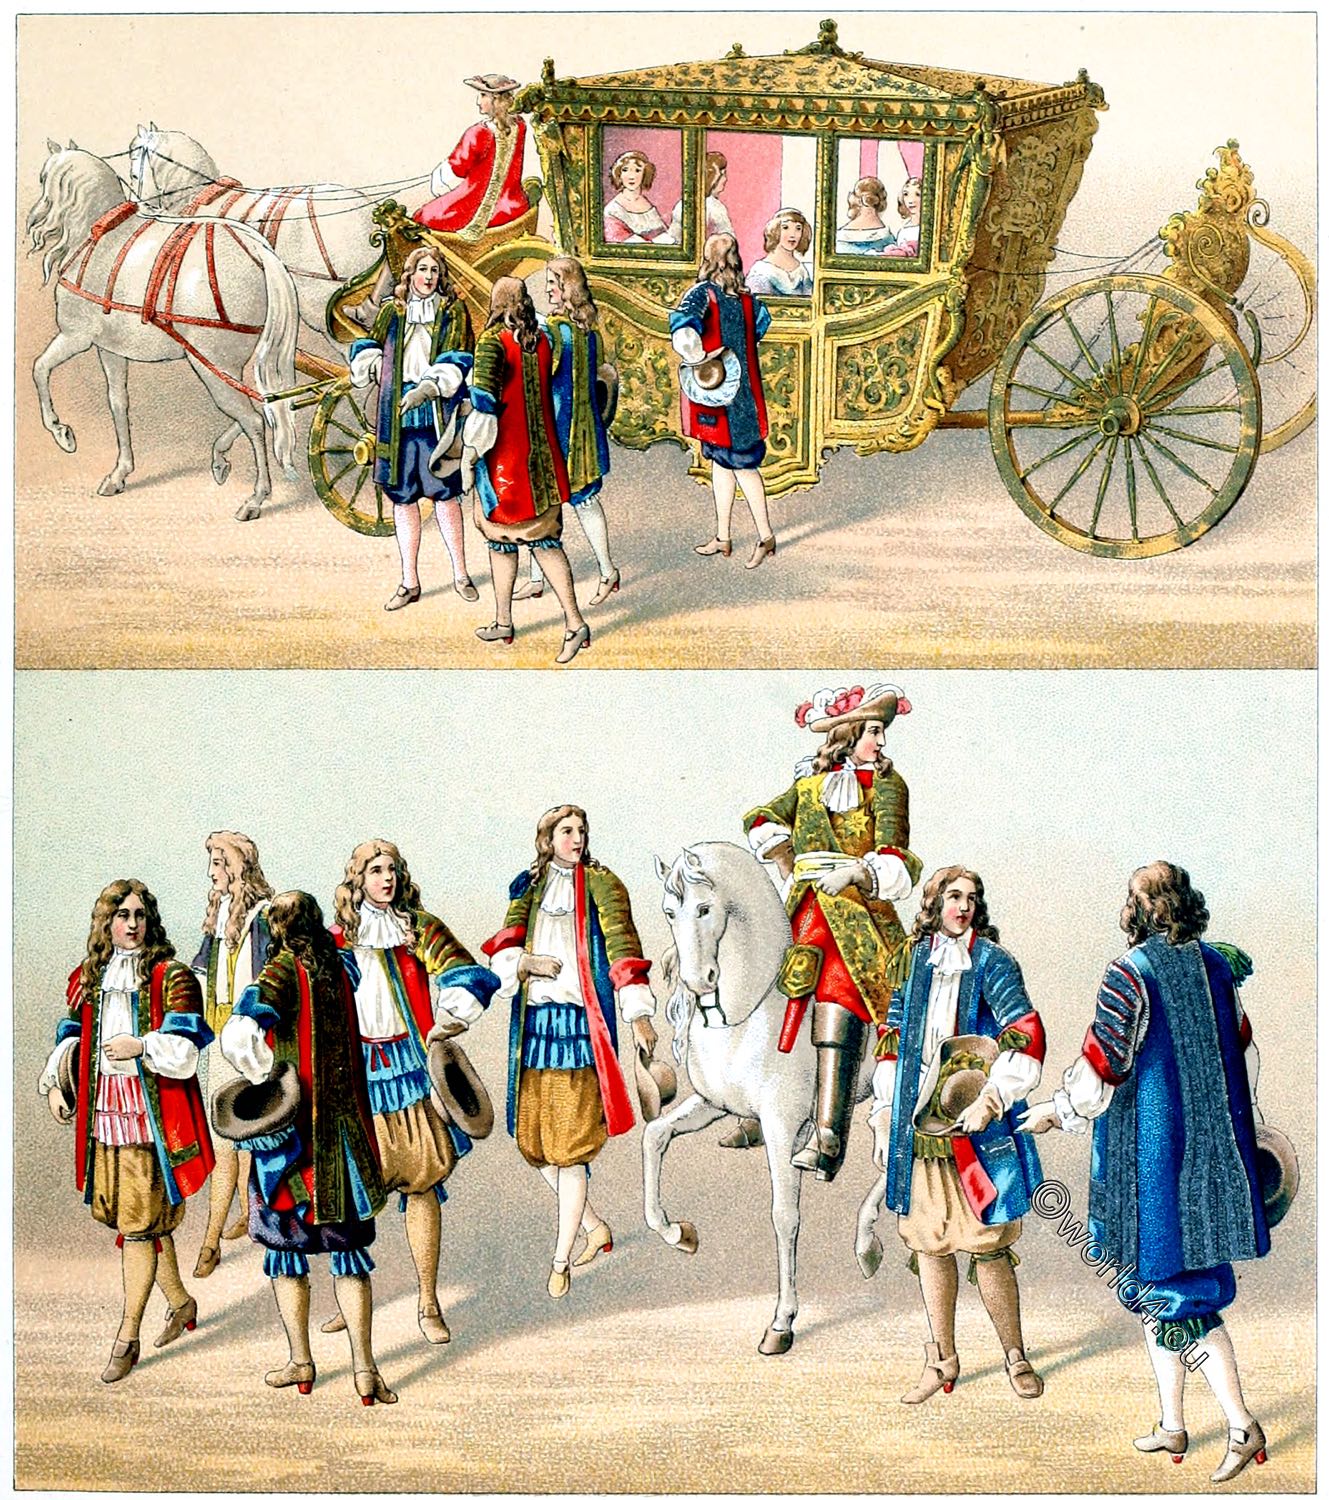 Louis XIV, Livery, Arras, state carriage, coach, baroque, France, clothing, costumes